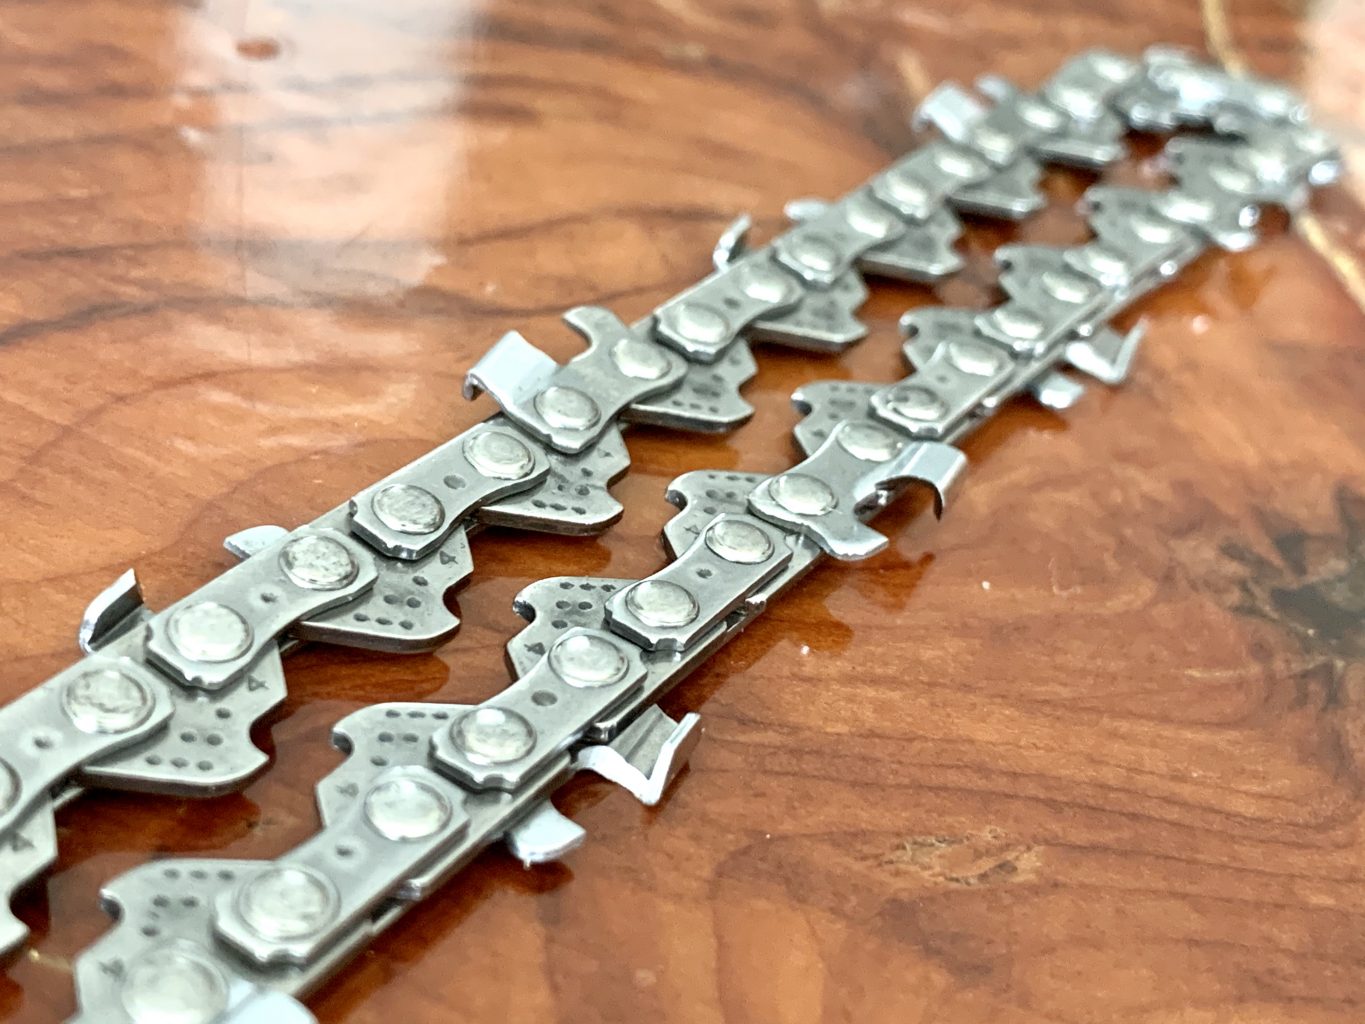 PMC Panther Mini Chain 1/4 .043 64 Drive Link Chain for 12"[30cm] Panther Mini Bars